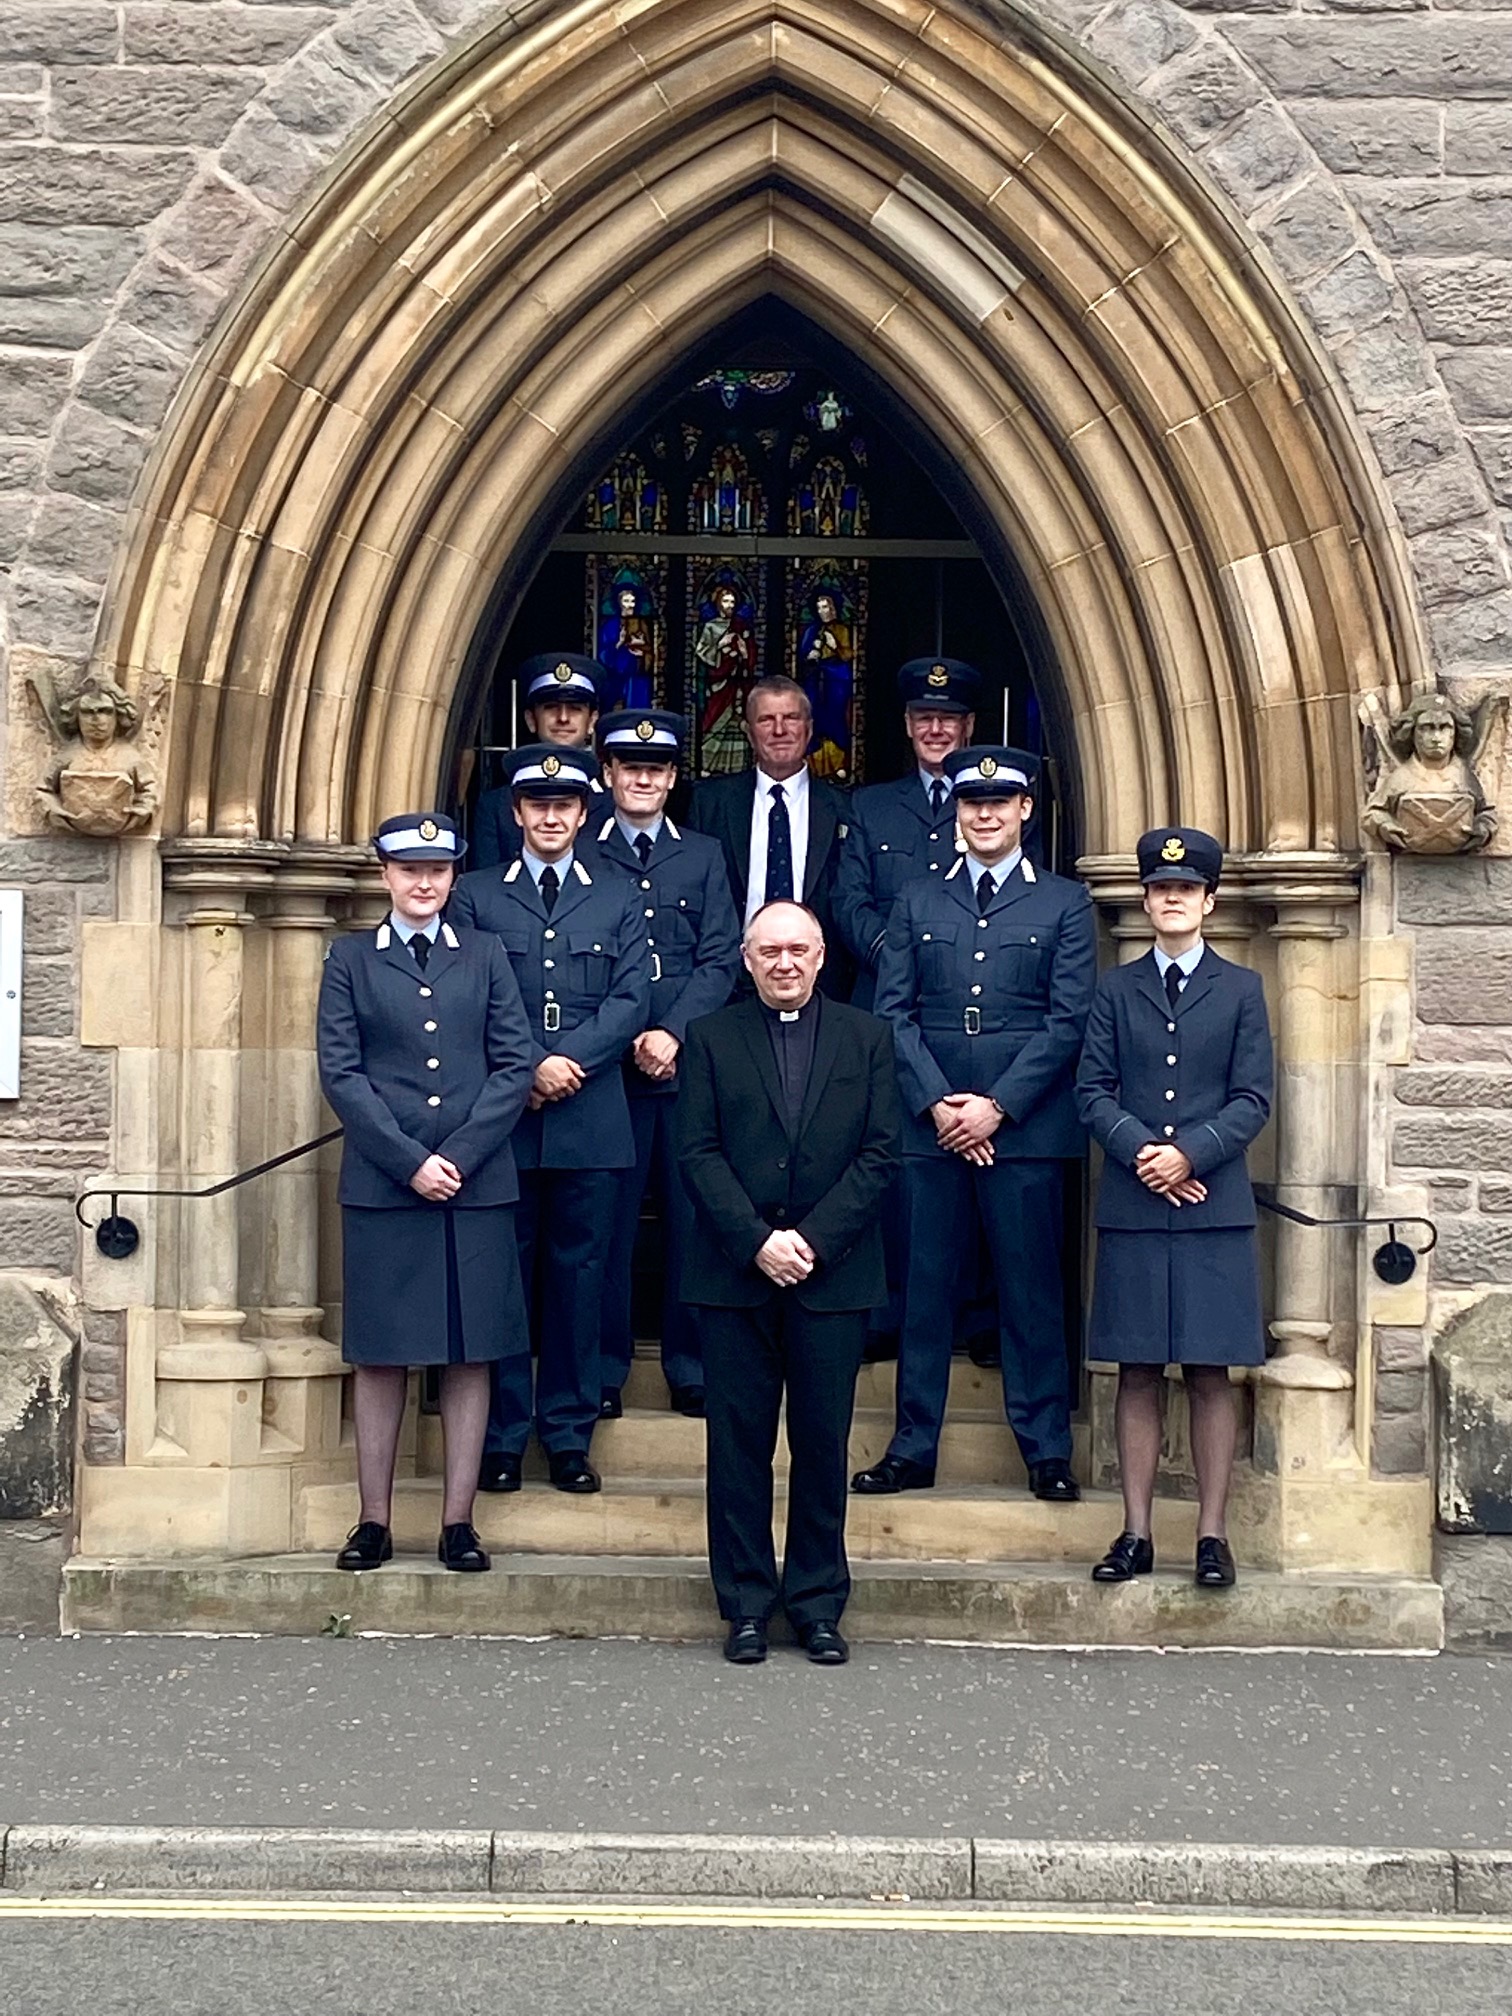 Image shows aviators standing under the archway entrance way to the cathedral, with the Reverend.